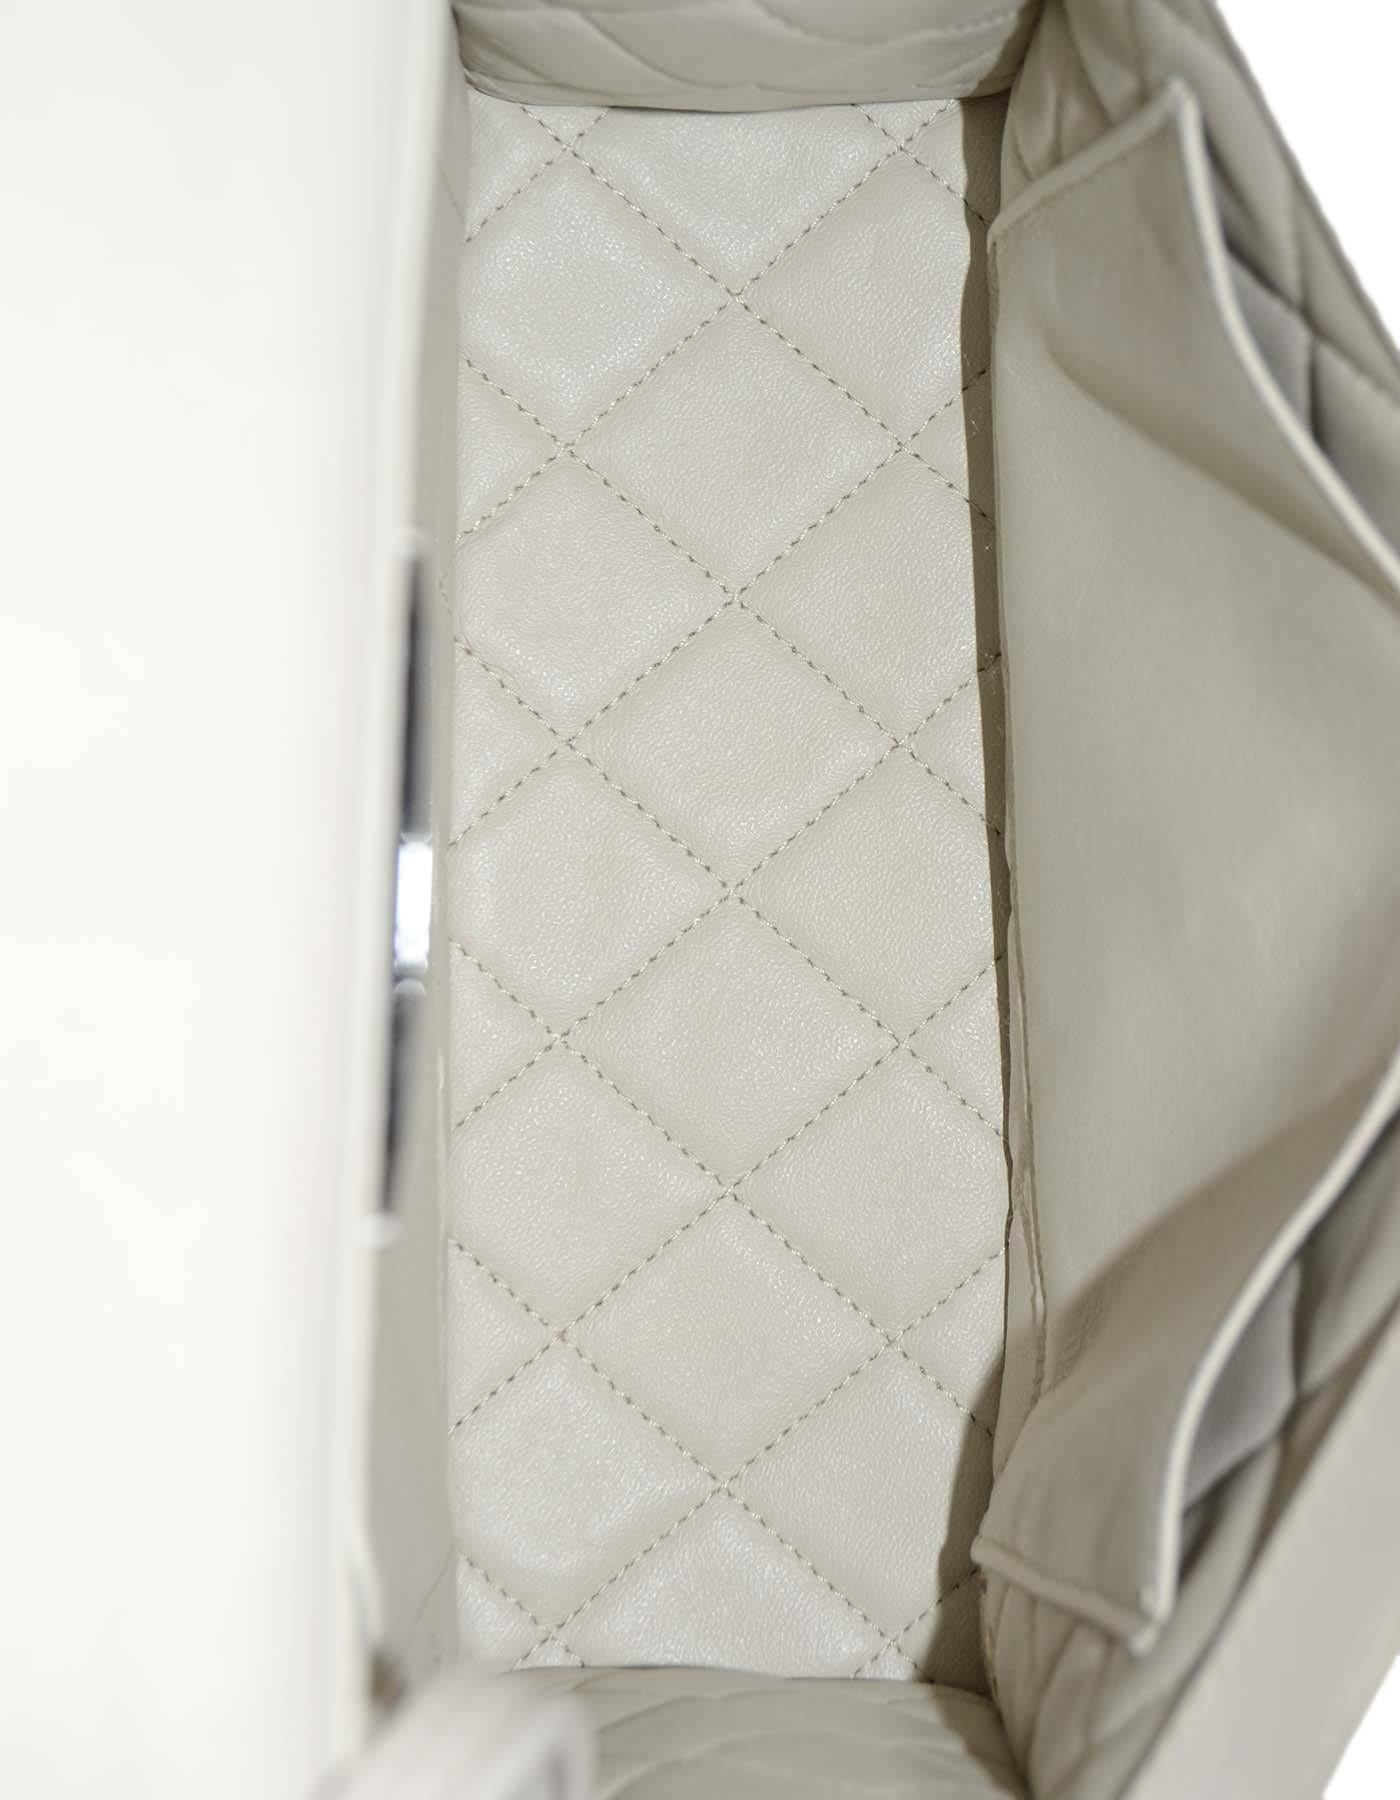 Beige Chanel 2016 Ivory Quilted Urban Luxury Flap Bag SHW RT. $4, 800